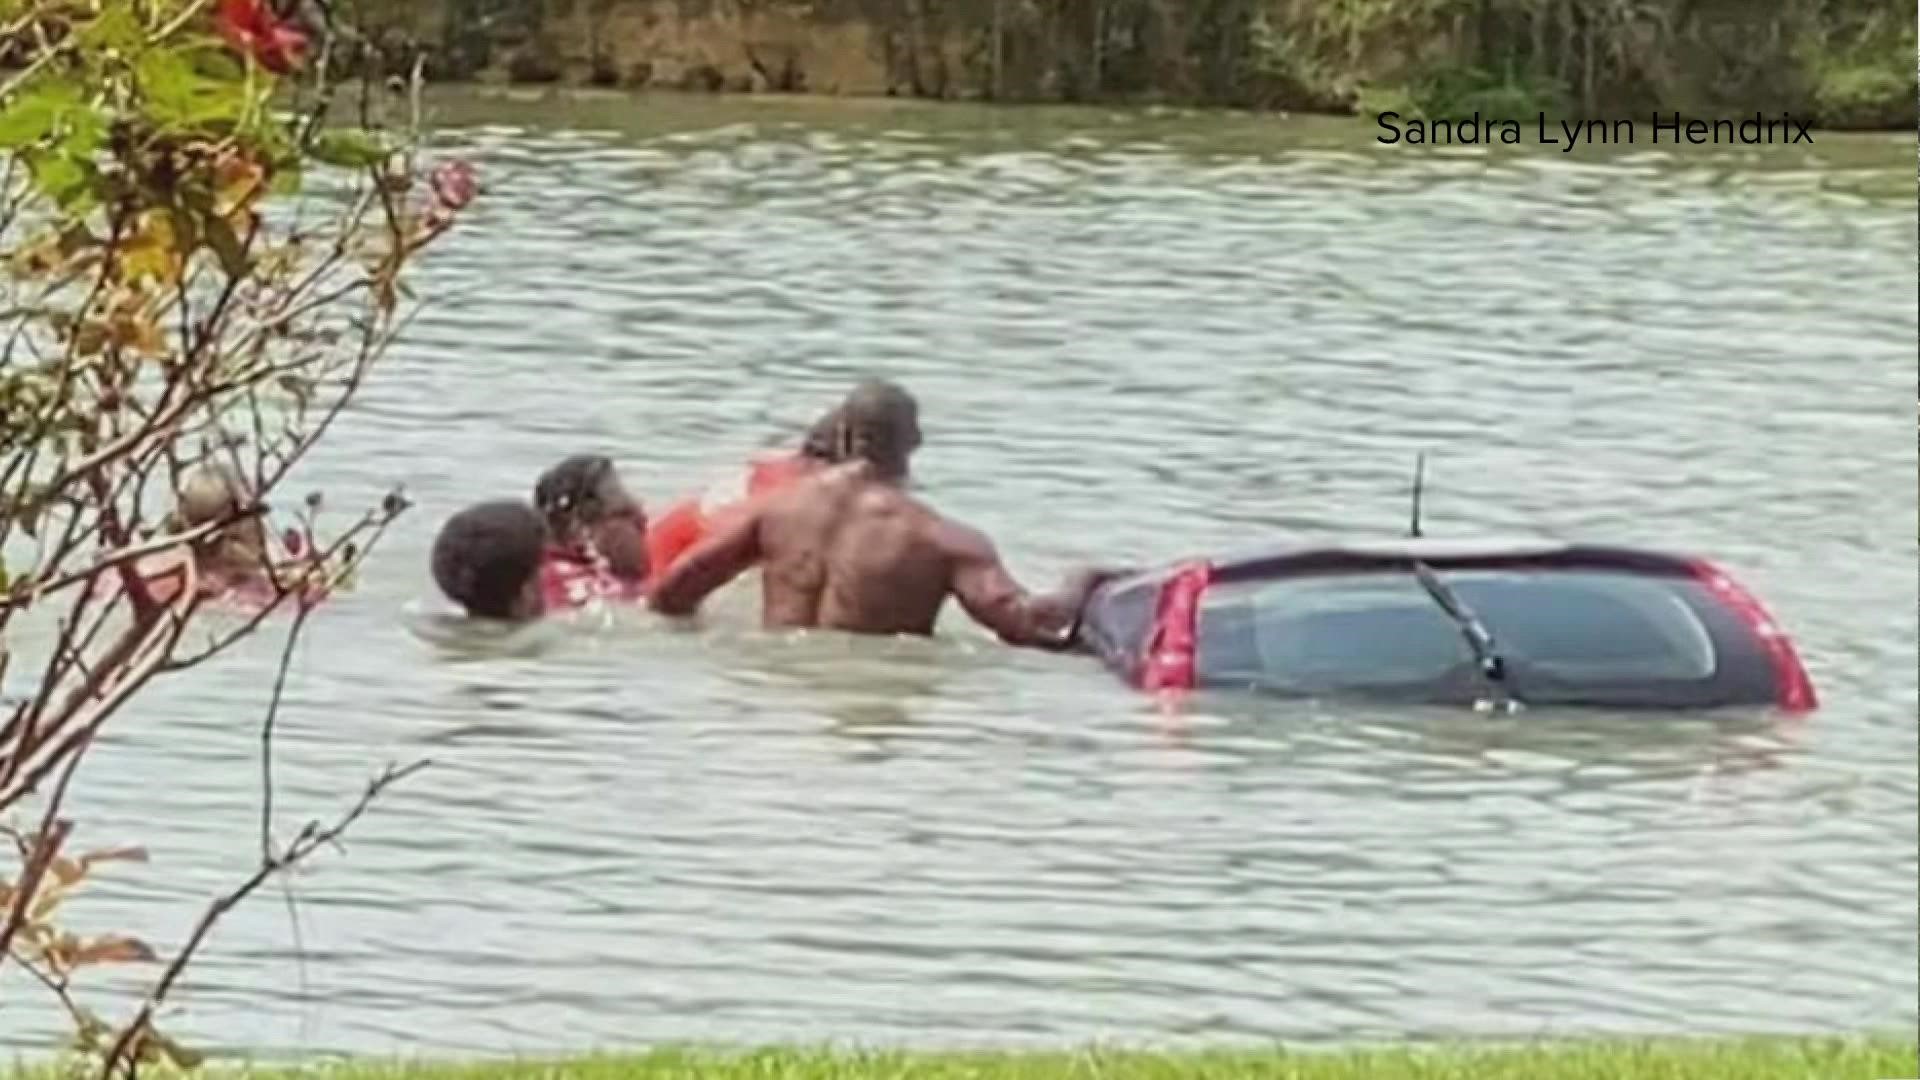 Several strangers jumped into a pond to rescue woman who lost control of her vehicle because of a medical issue.